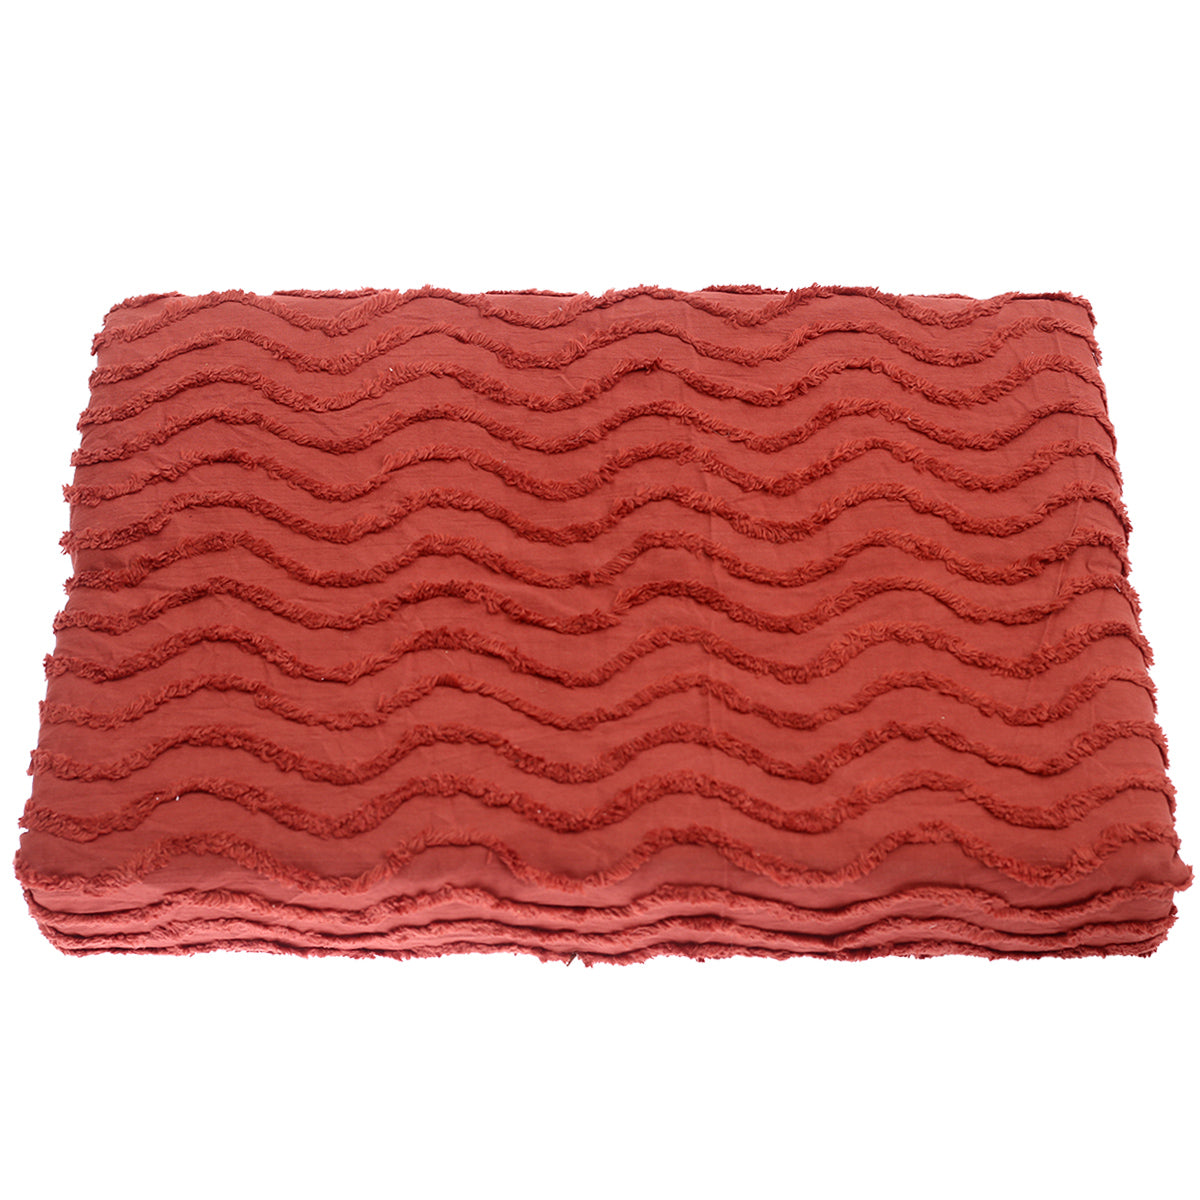 Rustic Wavy Double Bed Cover